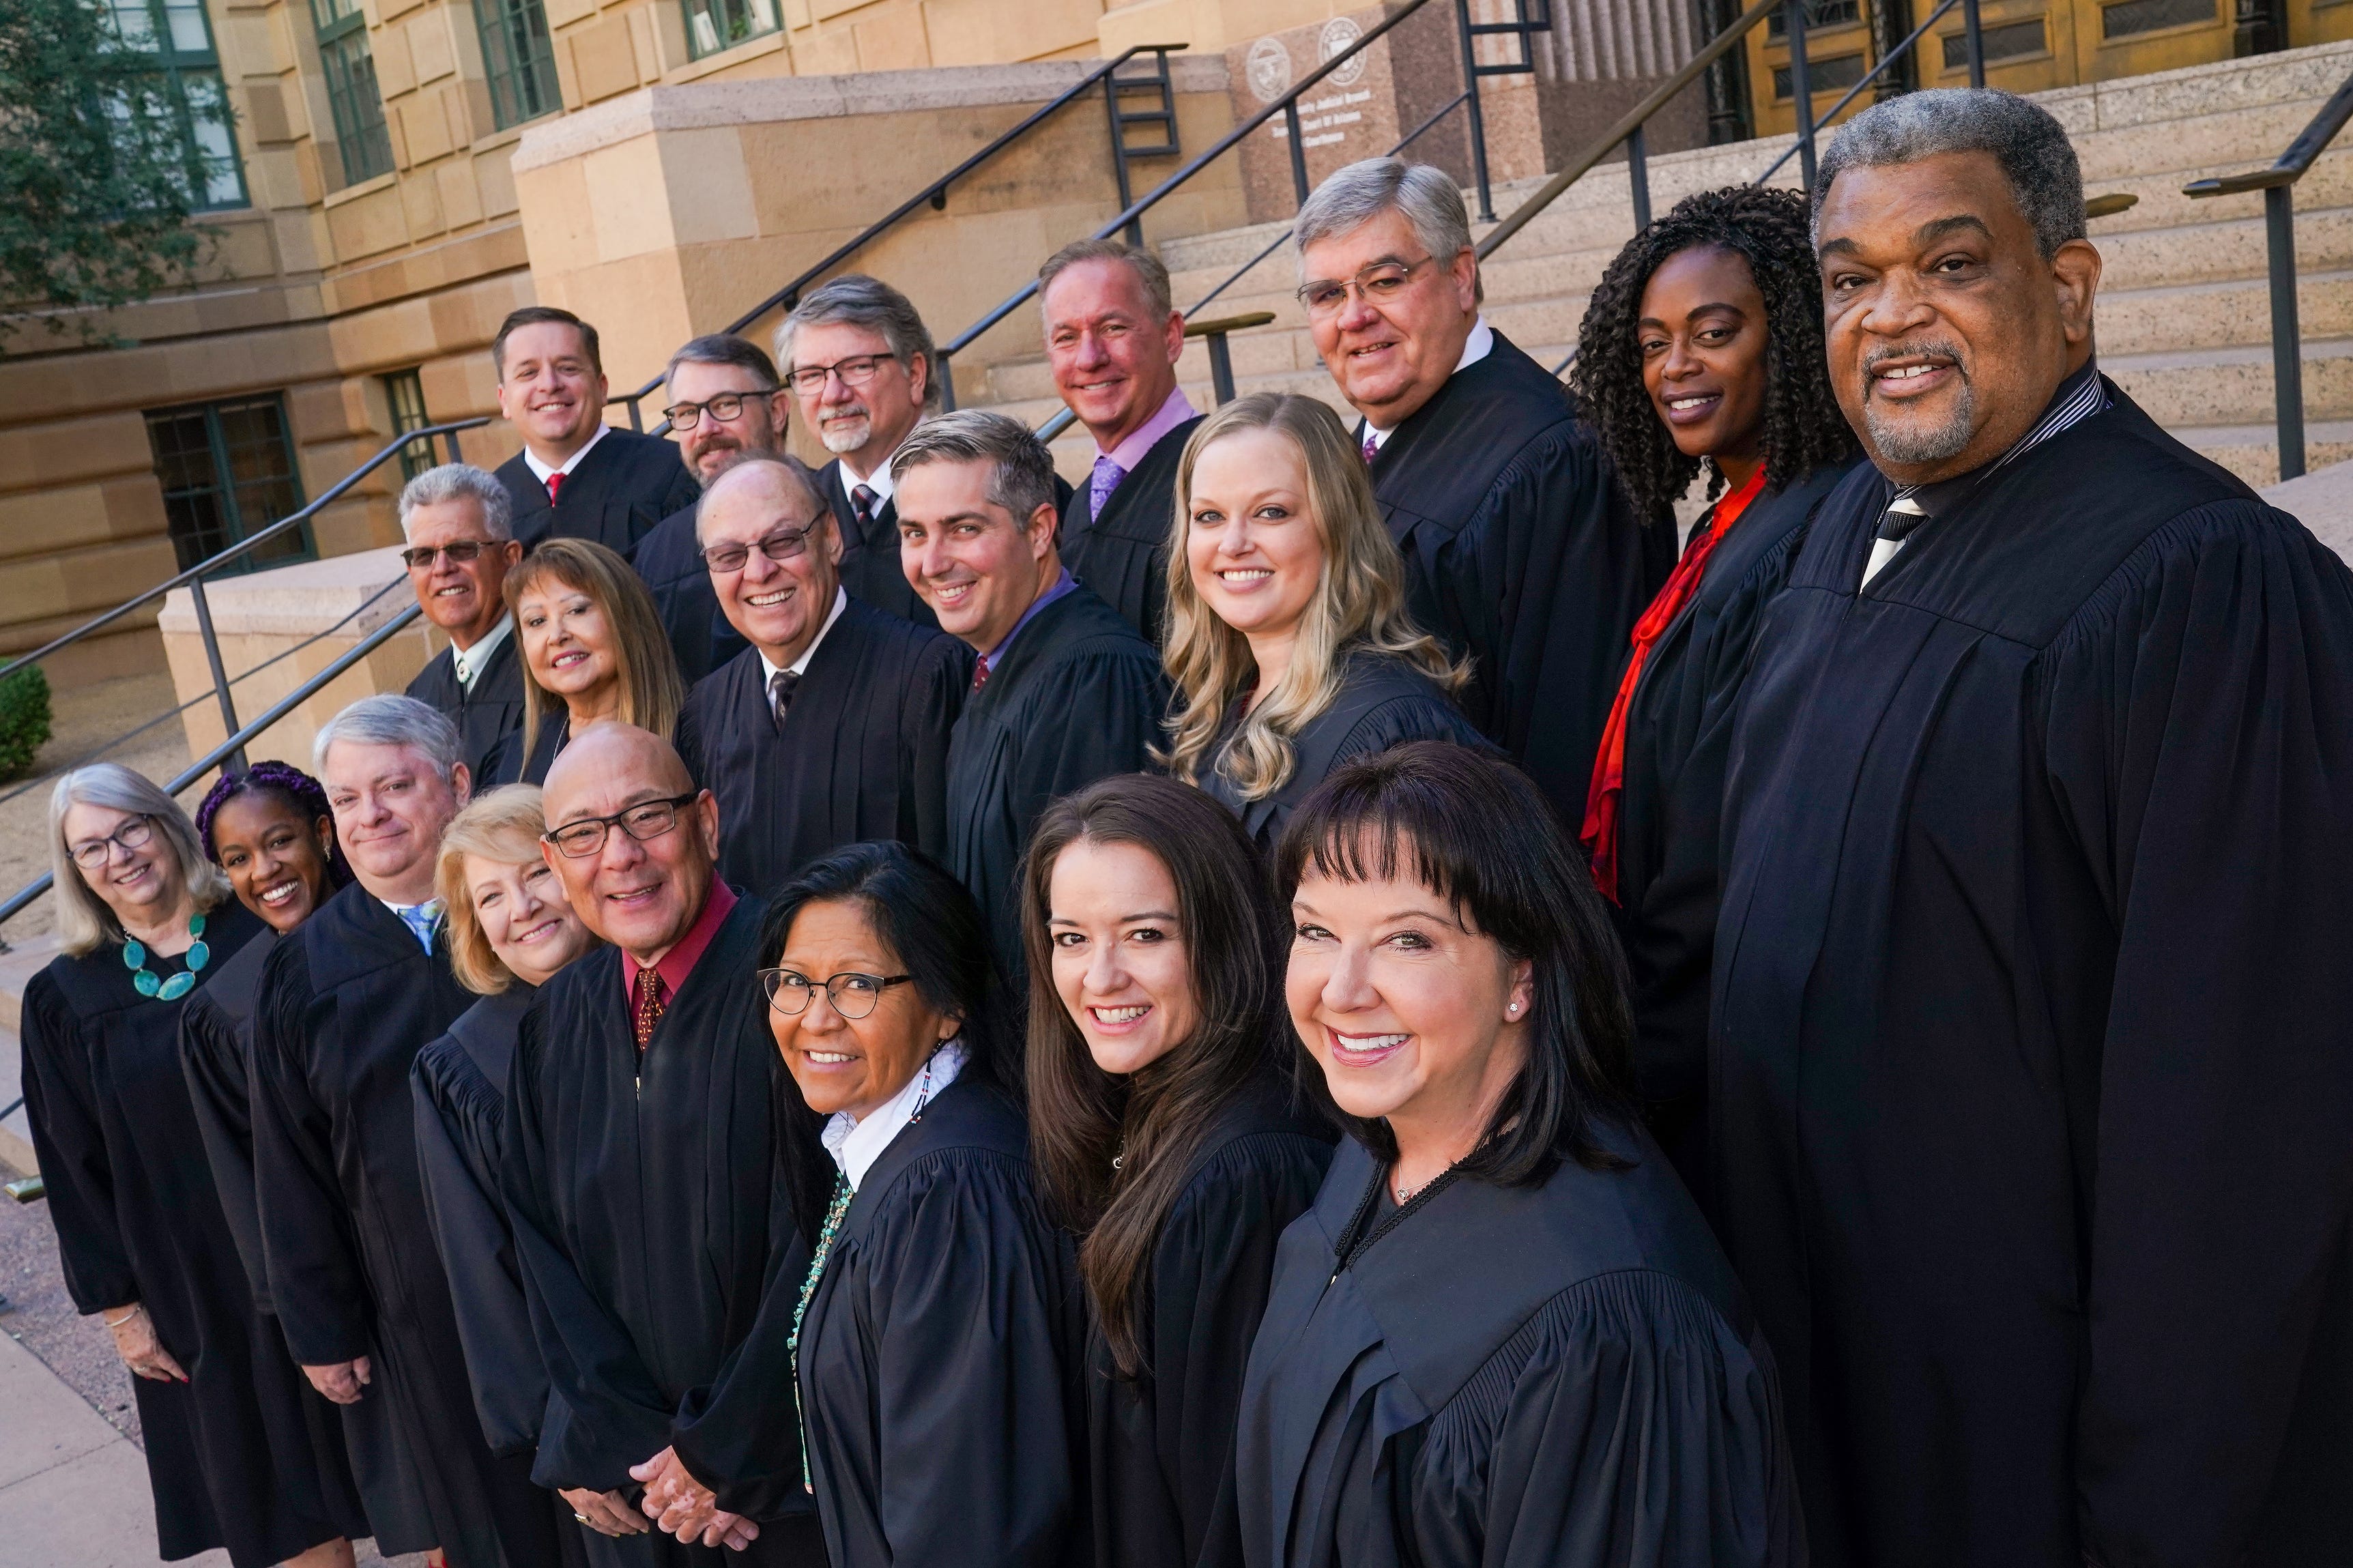 Justices of the peace in Maricopa County pose for a group photo outside the Maricopa County Courthouse on Friday, Oct. 29, 2021, in Phoenix.